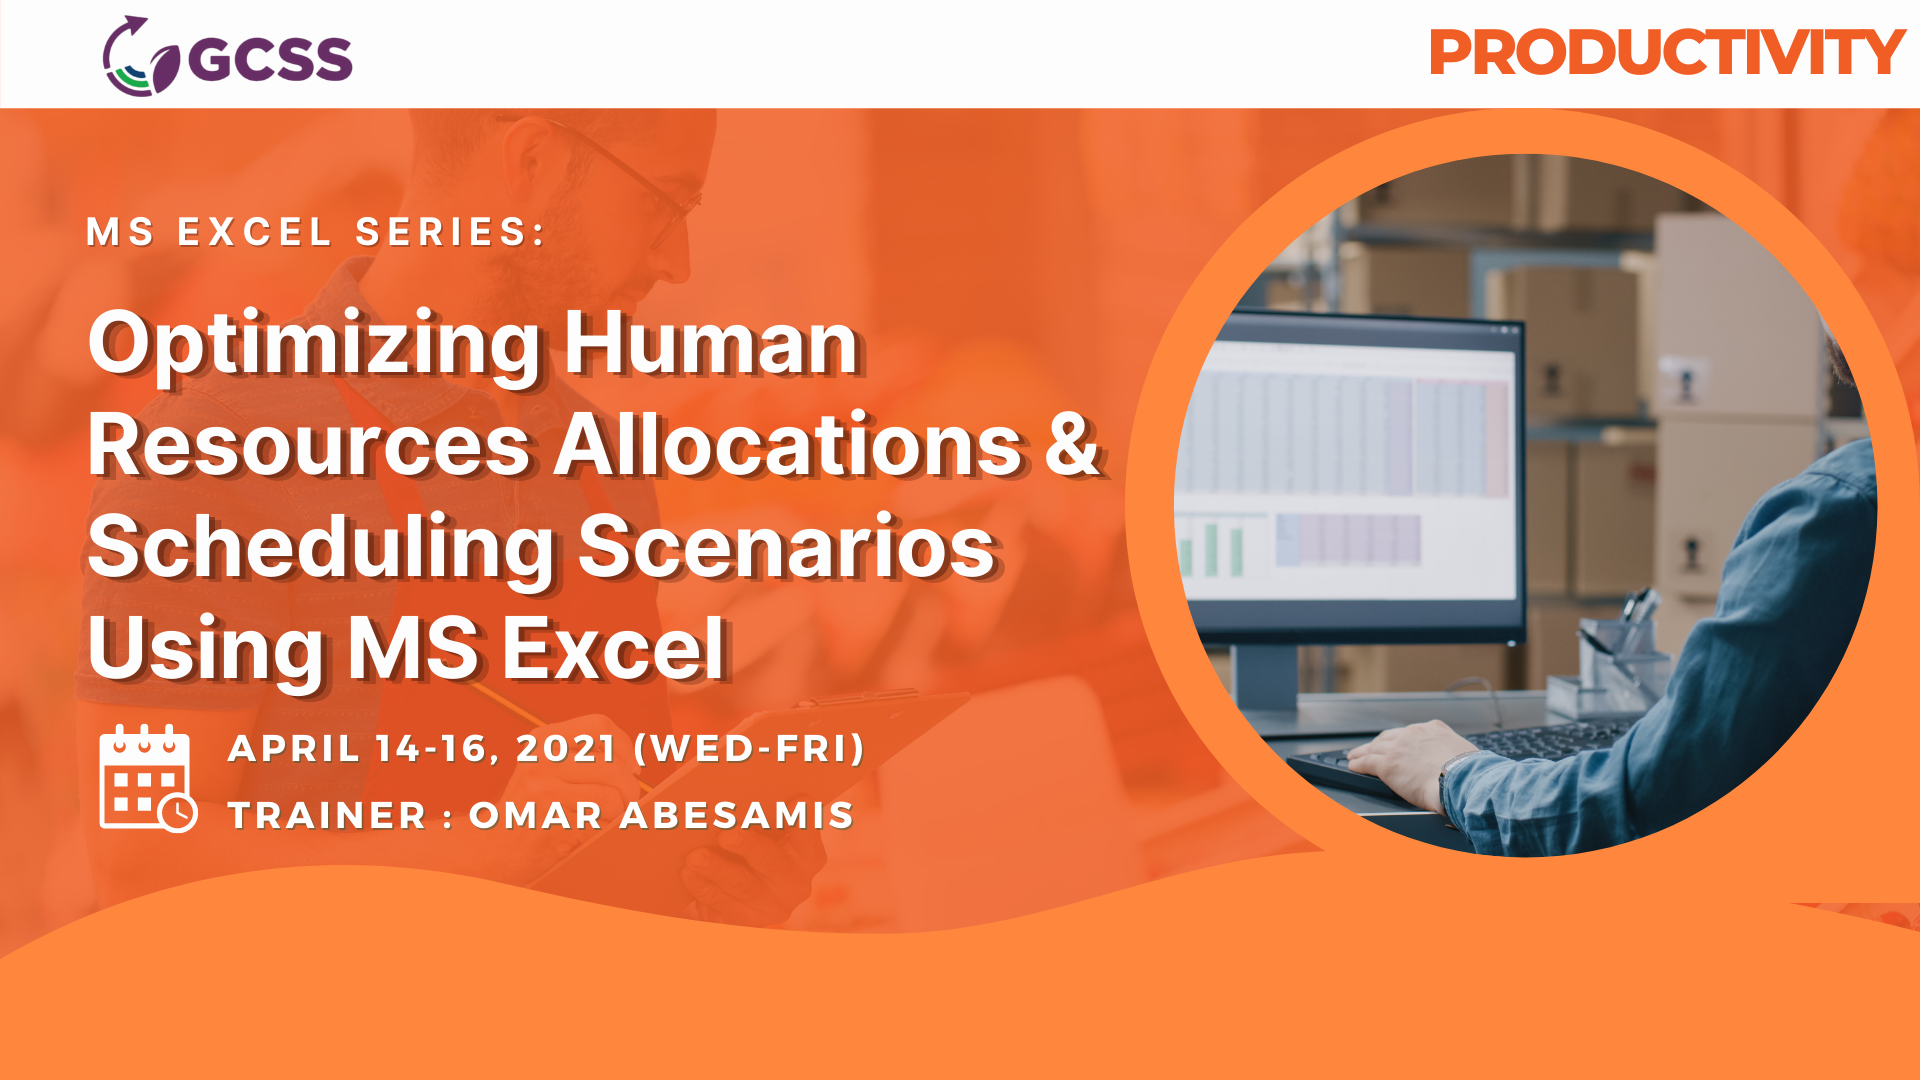 Optimizing Human Resources Allocations And Scheduling Scenarios Using MS Excel, Manila, National Capital Region, Philippines